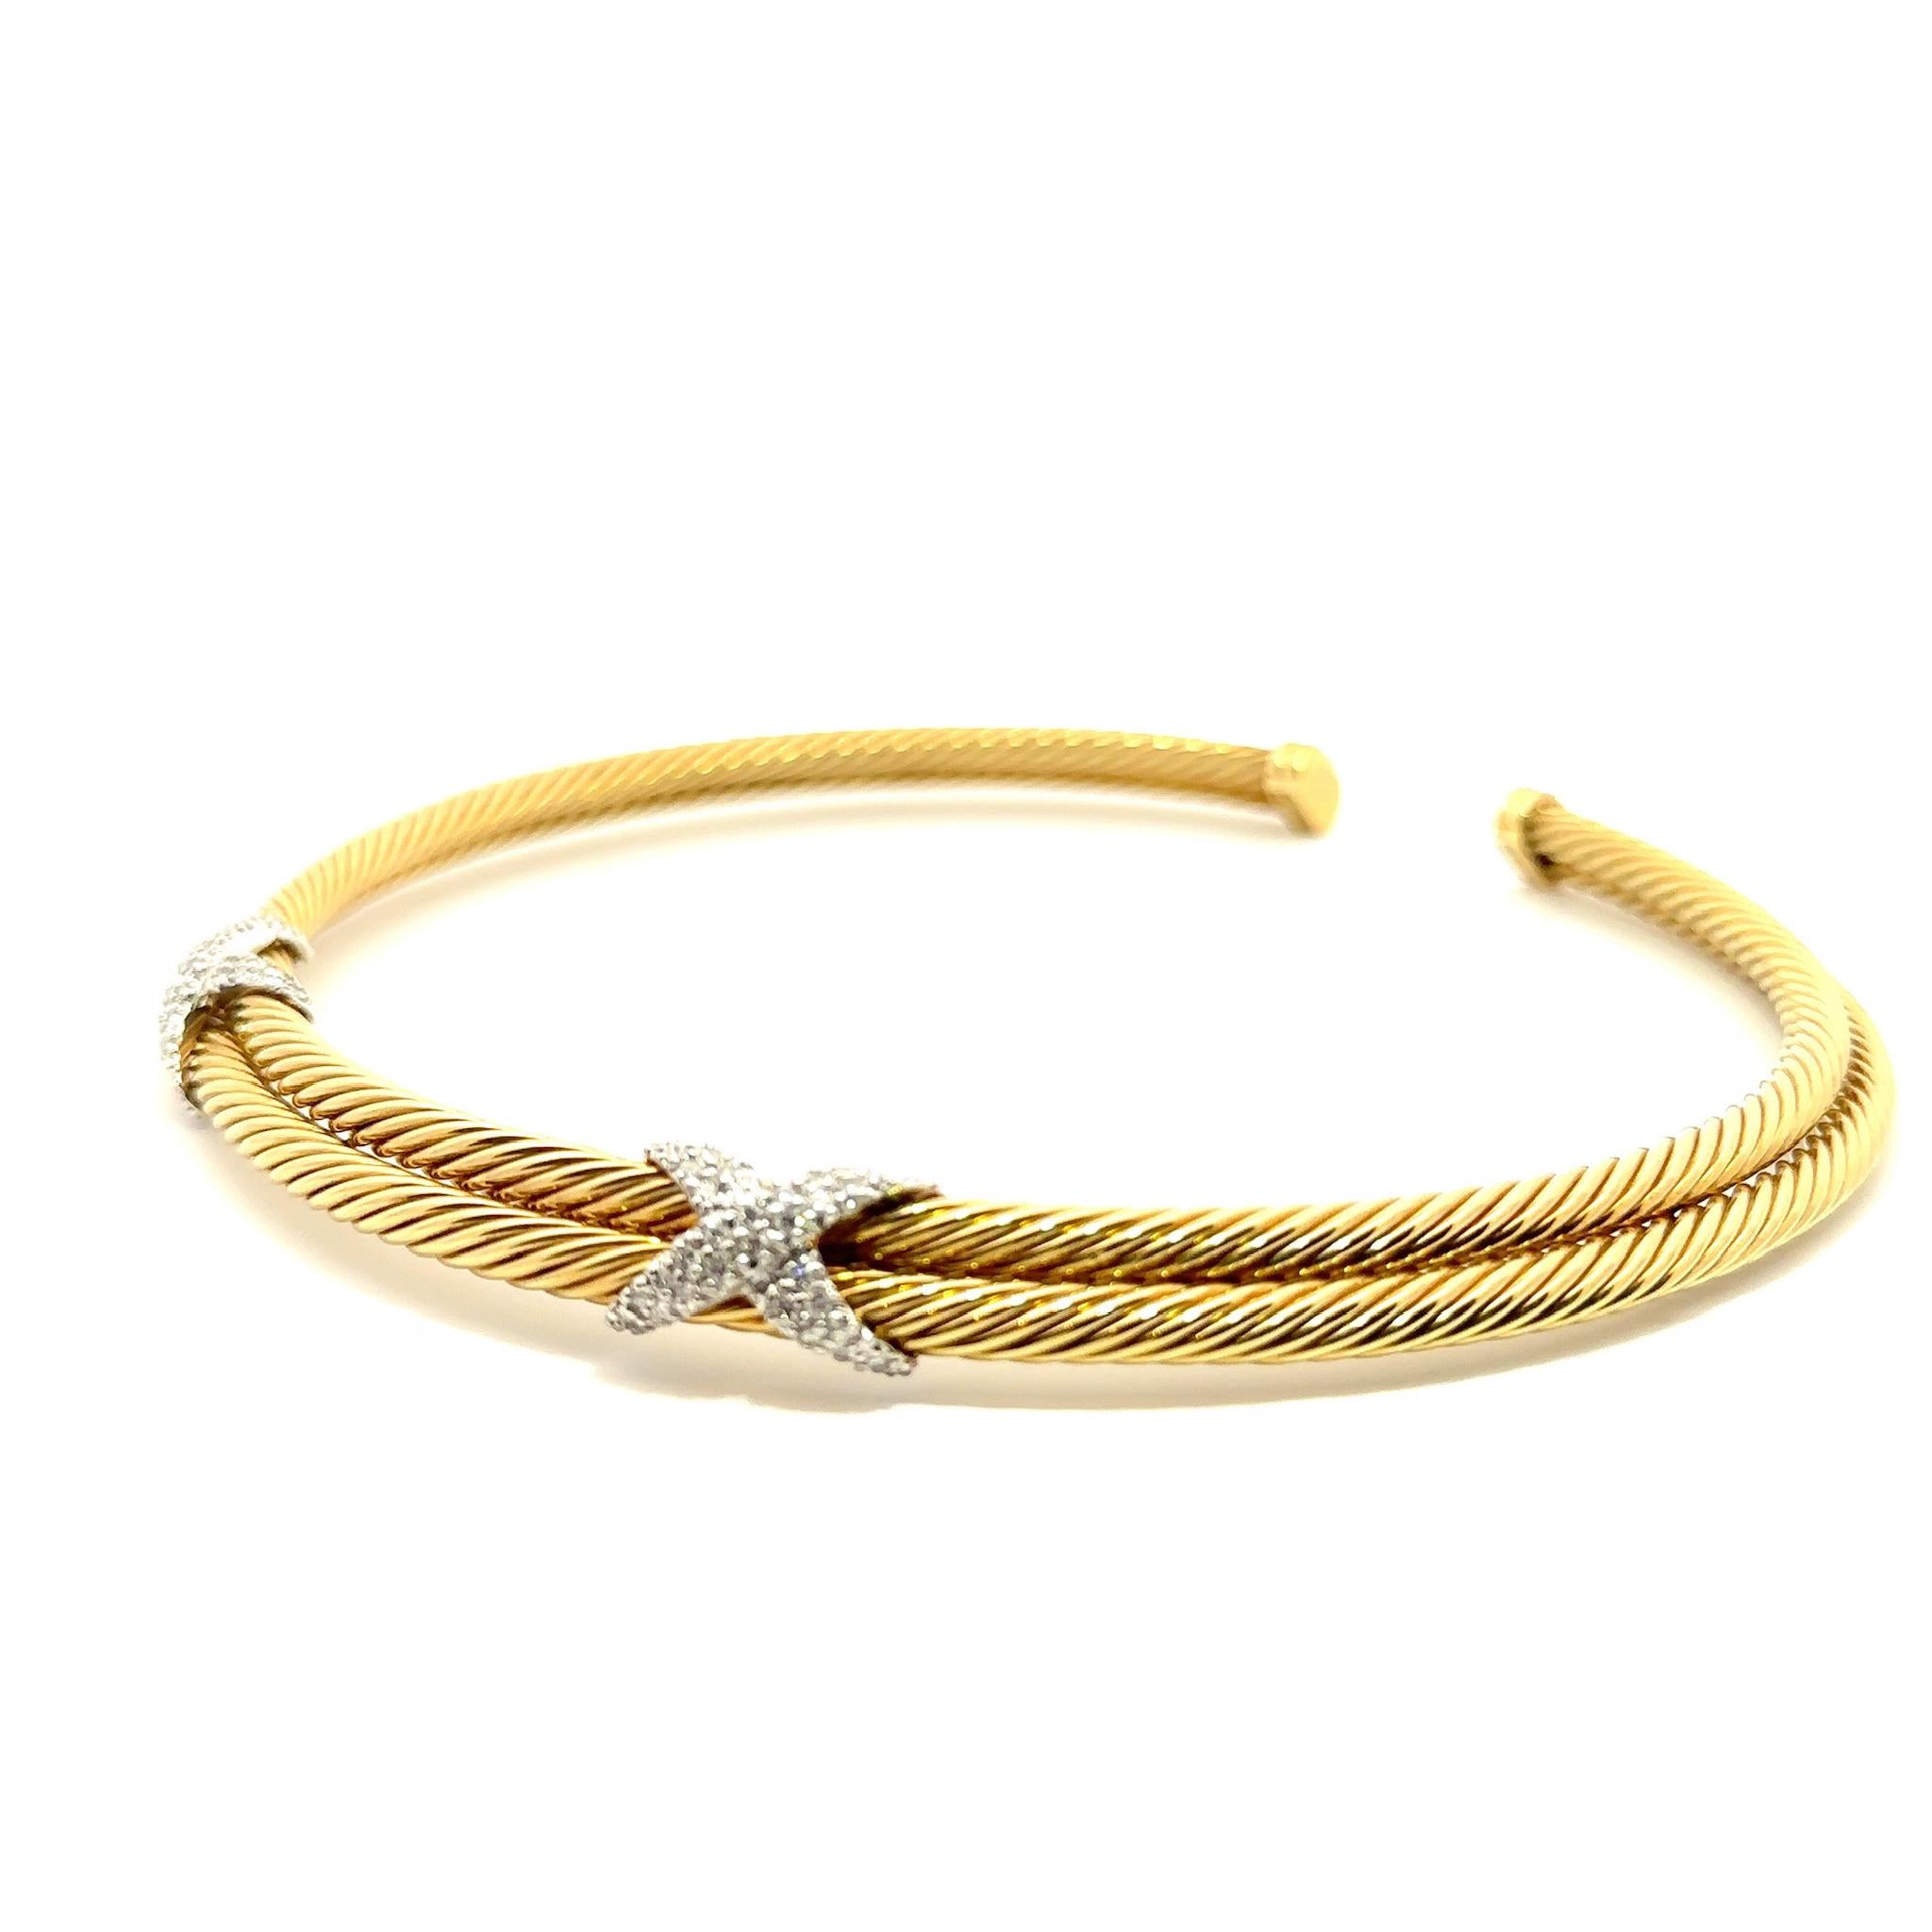 This is a beautifully designed and crafted original David Yurman Choker made in 18K yellow gold. The stunning necklace has a spiral rope-like look that intensifies its shine and amplifies what could be a basic choker with diamonds to a luxury